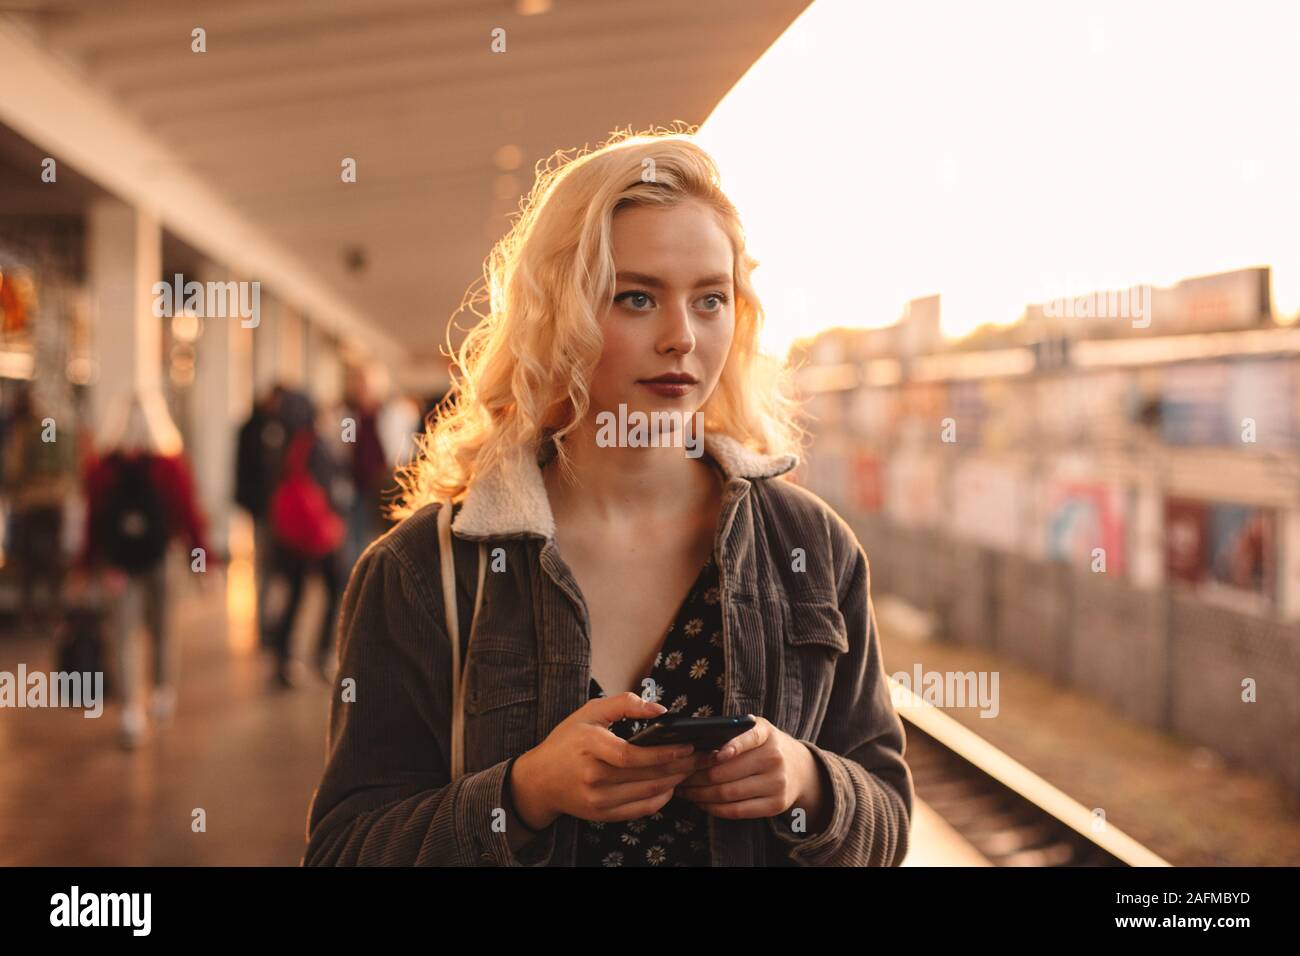 Young woman holding smart phone while waiting for train Stock Photo